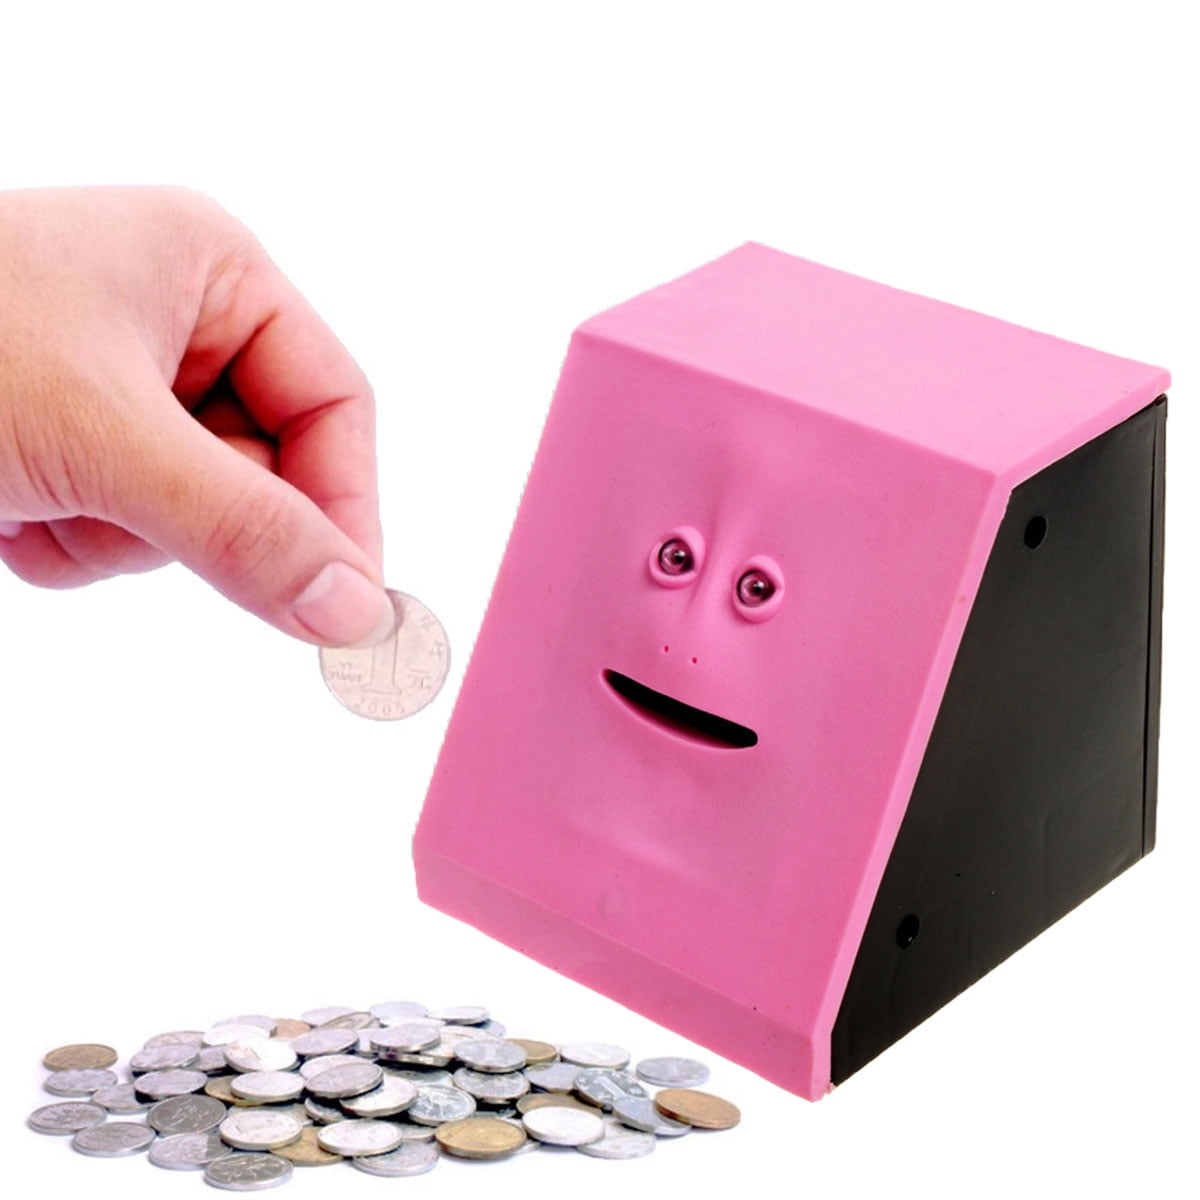 Glans Miles Kort leven Electric Face Coin Bank Face Money Eating Chewing Box Cute Face Coin  Collection Box Battery Powered Automatic Money Saving Bank Portable Coin  Container for Children Kids Toys Home Office Decoration - Walmart.com